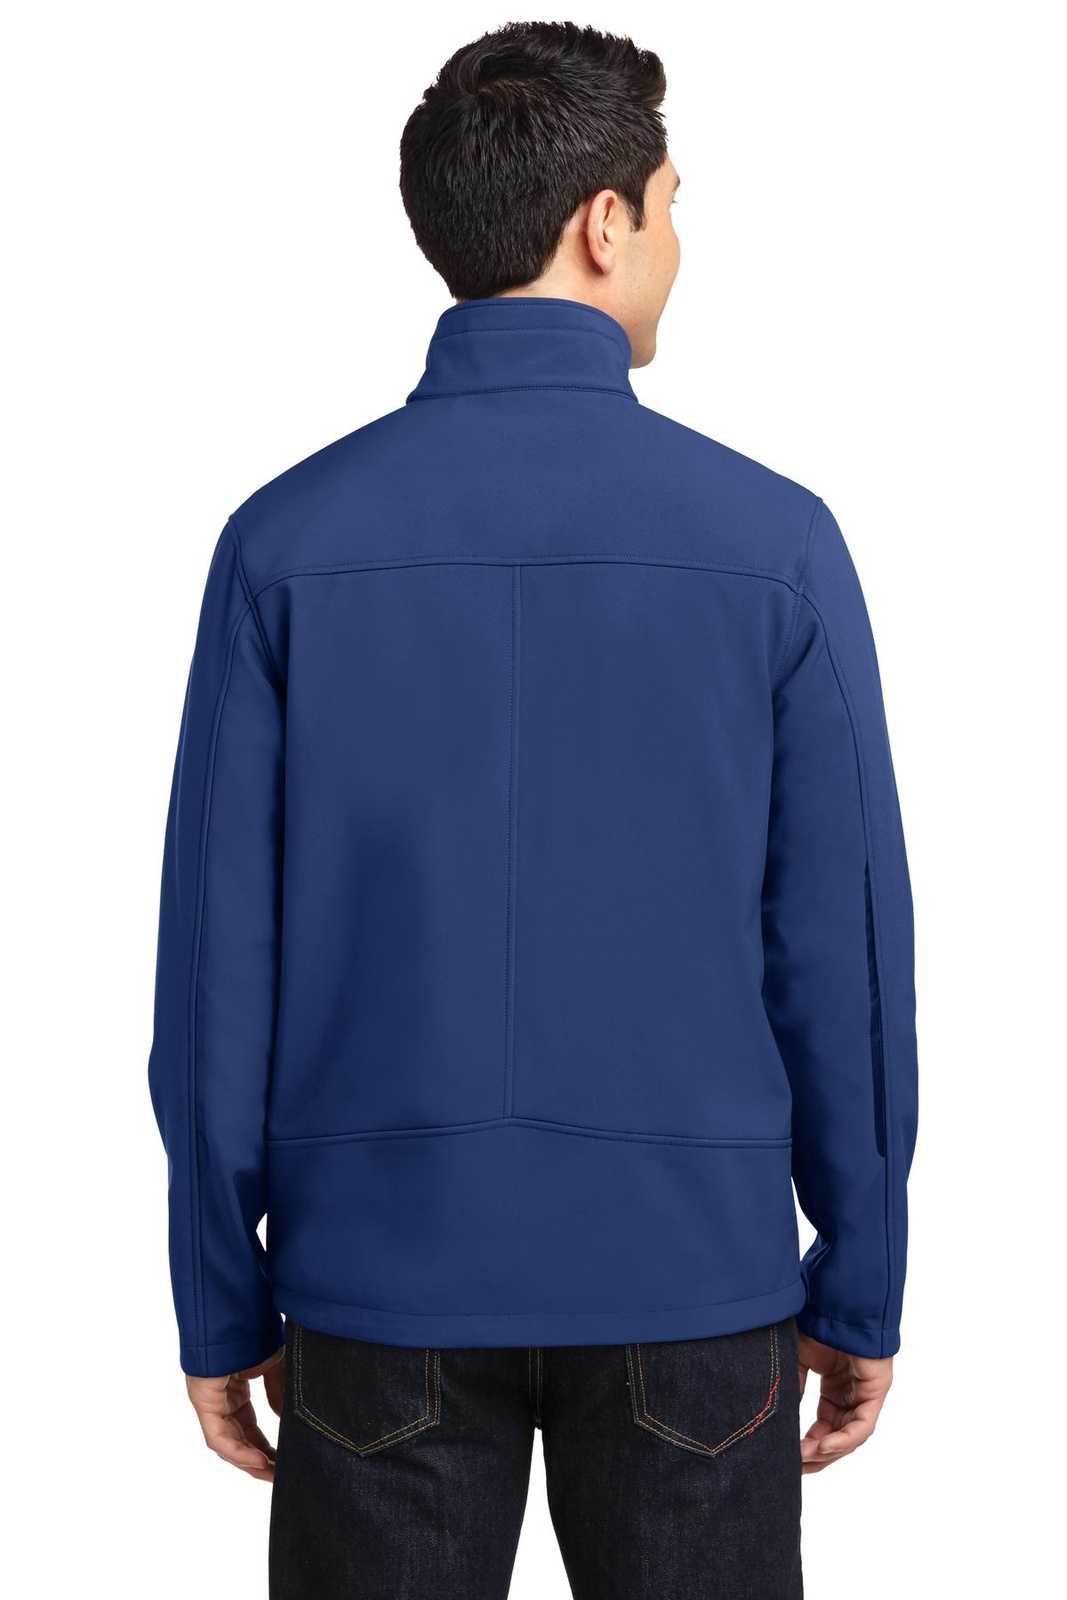 Port Authority J324 Welded Soft Shell Jacket - Estate Blue - HIT a Double - 2